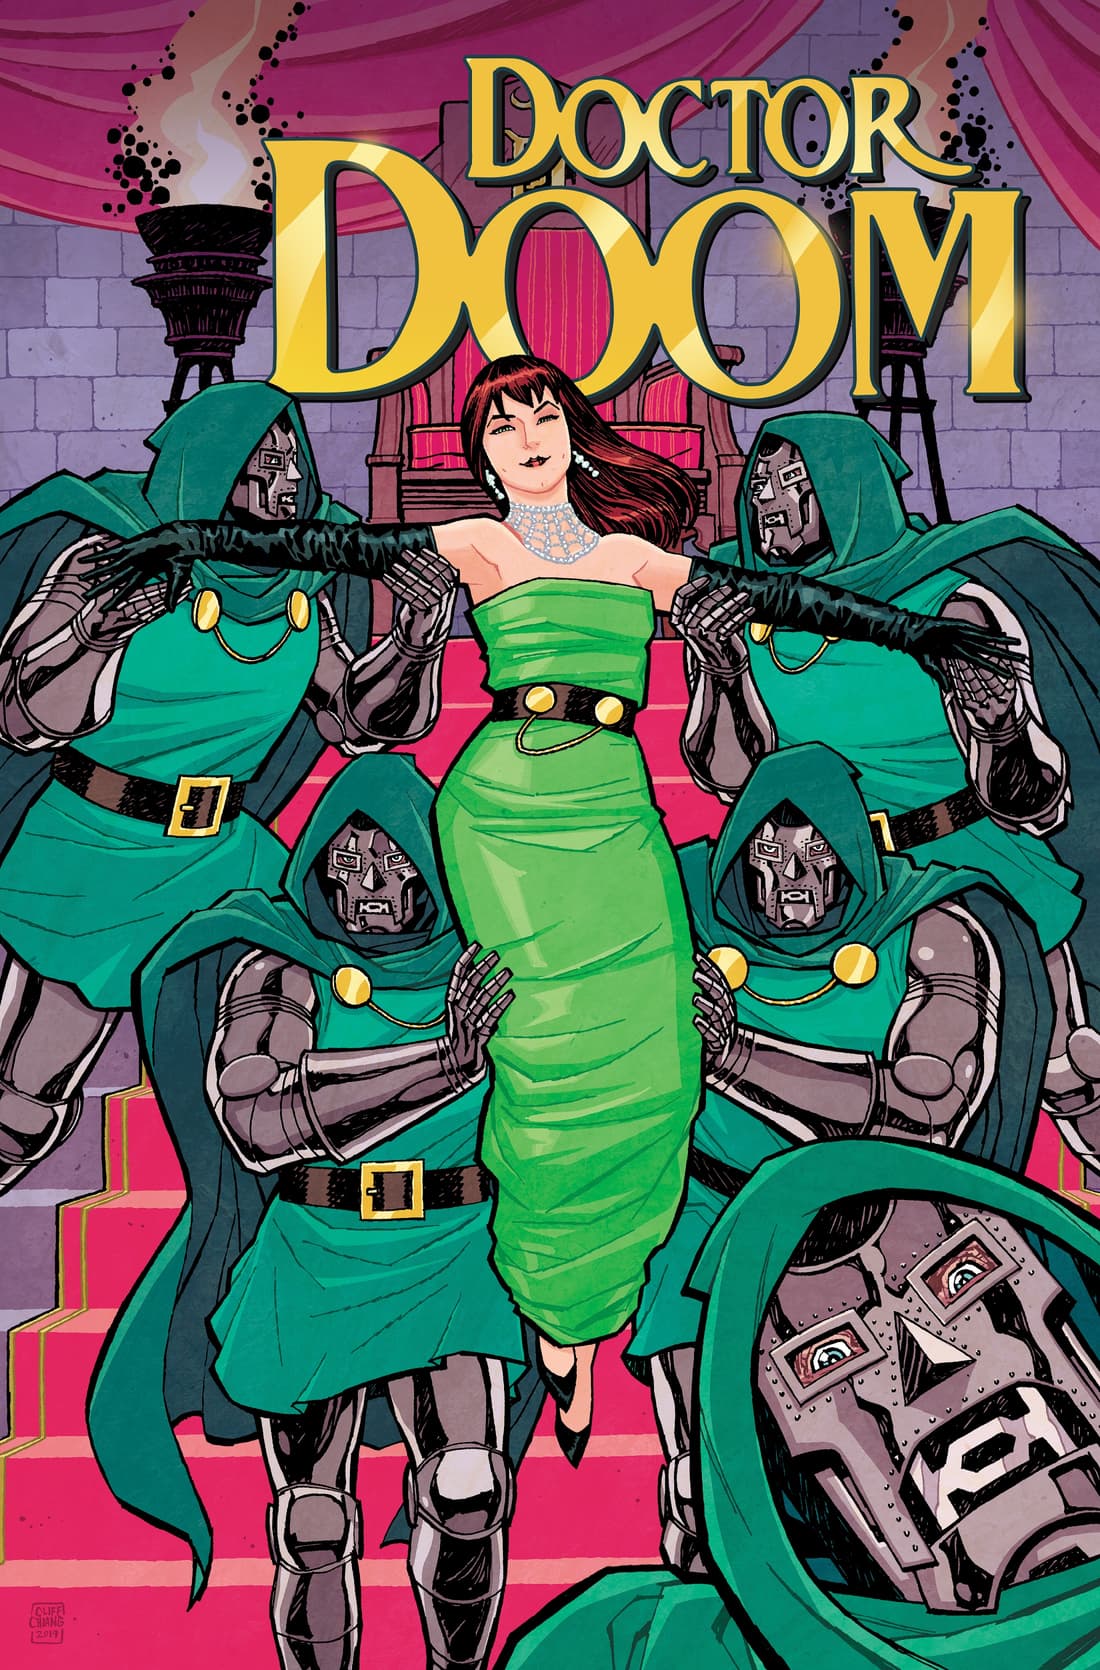 DOCTOR DOOM #1 variant art by Cliff Chiang 